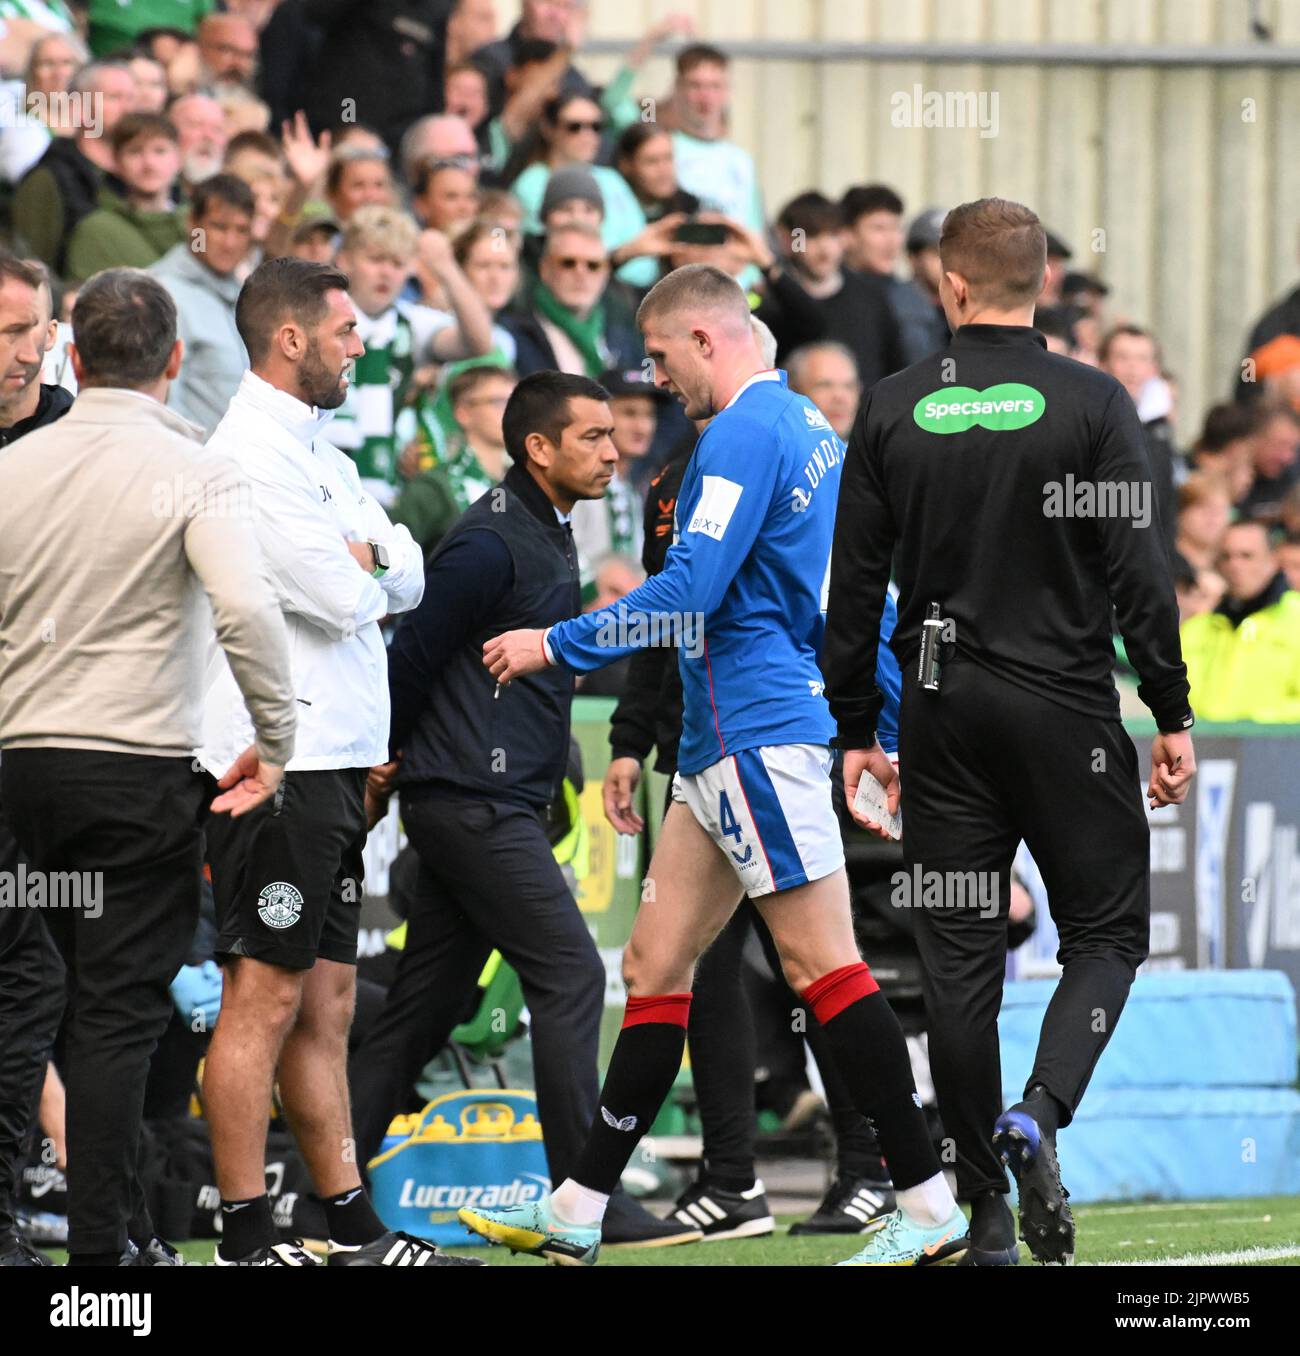 Easter Road Stadium Edinburgh.Scotland.UK.20th Aug-22 Hibs v Rangers Cinch Premiership Match Giovanni van Bronckhorst, manager of Rangers FC looks on as John Lundstram (#4) walks off after his red card from Referee Willie McCollum for his challenge on Hibs Martin Boyle Credit: eric mccowat/Alamy Live News Stock Photo